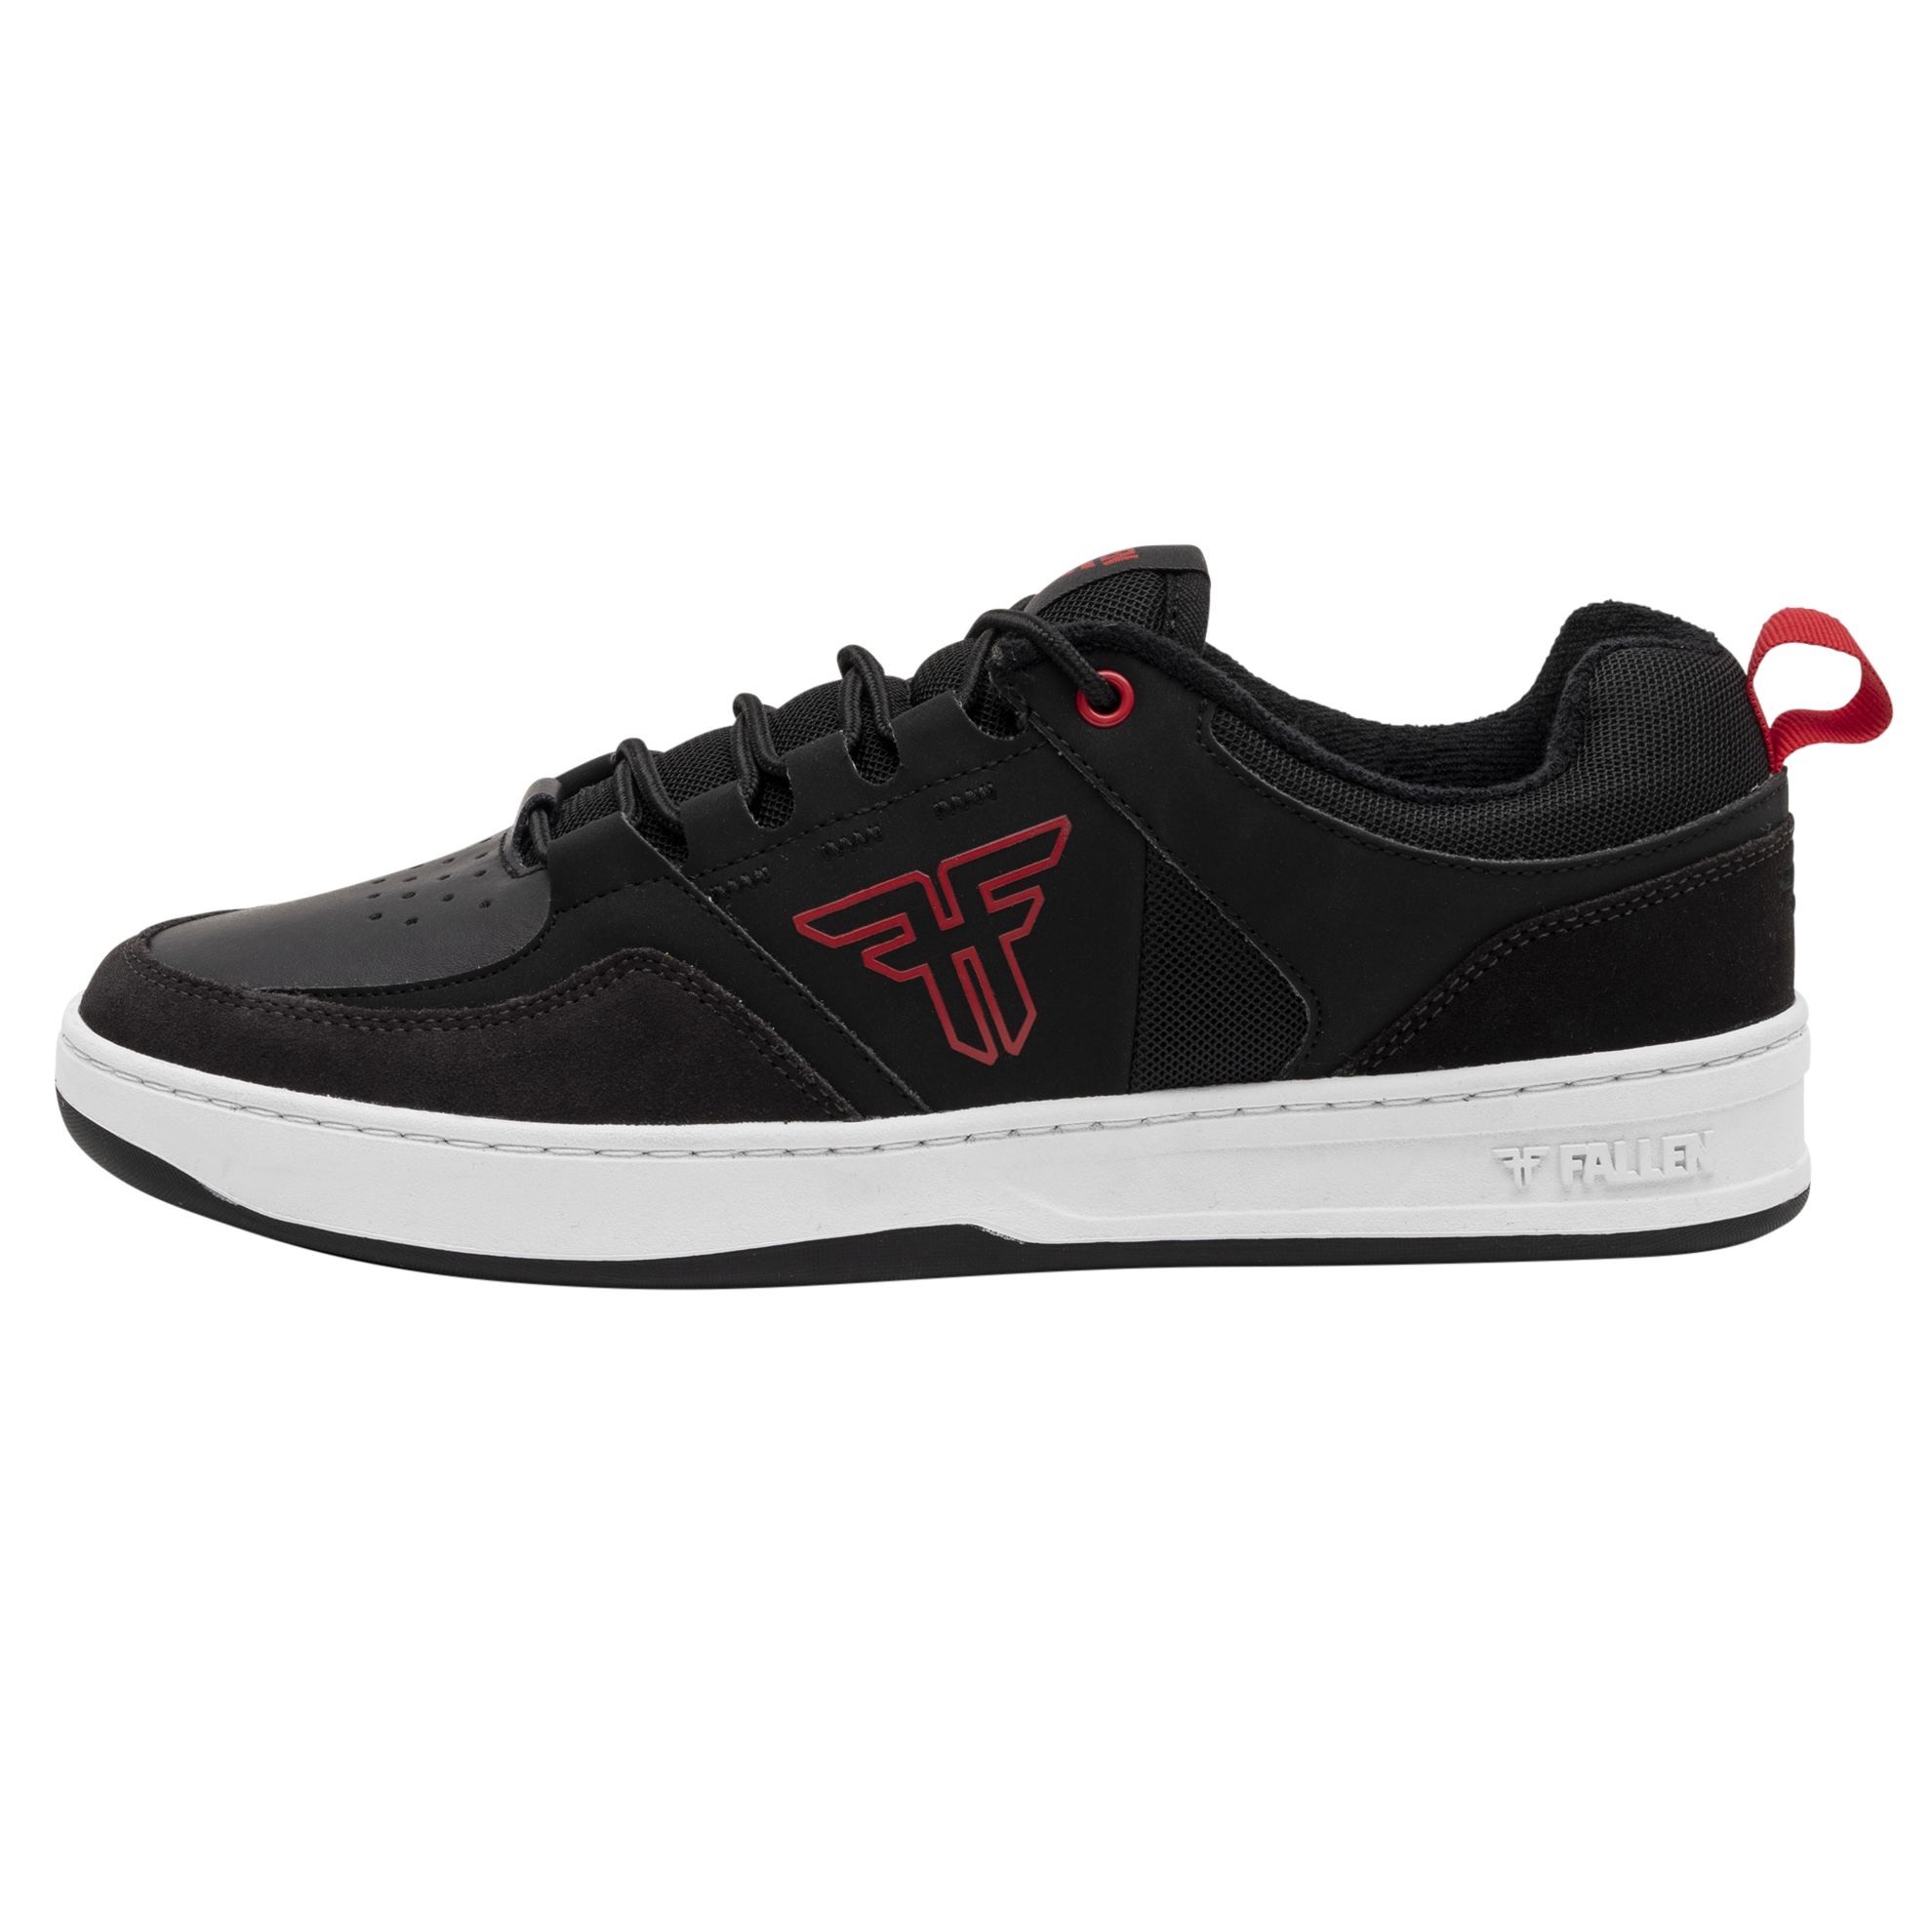 THE CREST BLACK/GRAY/RED - CUPSOLE